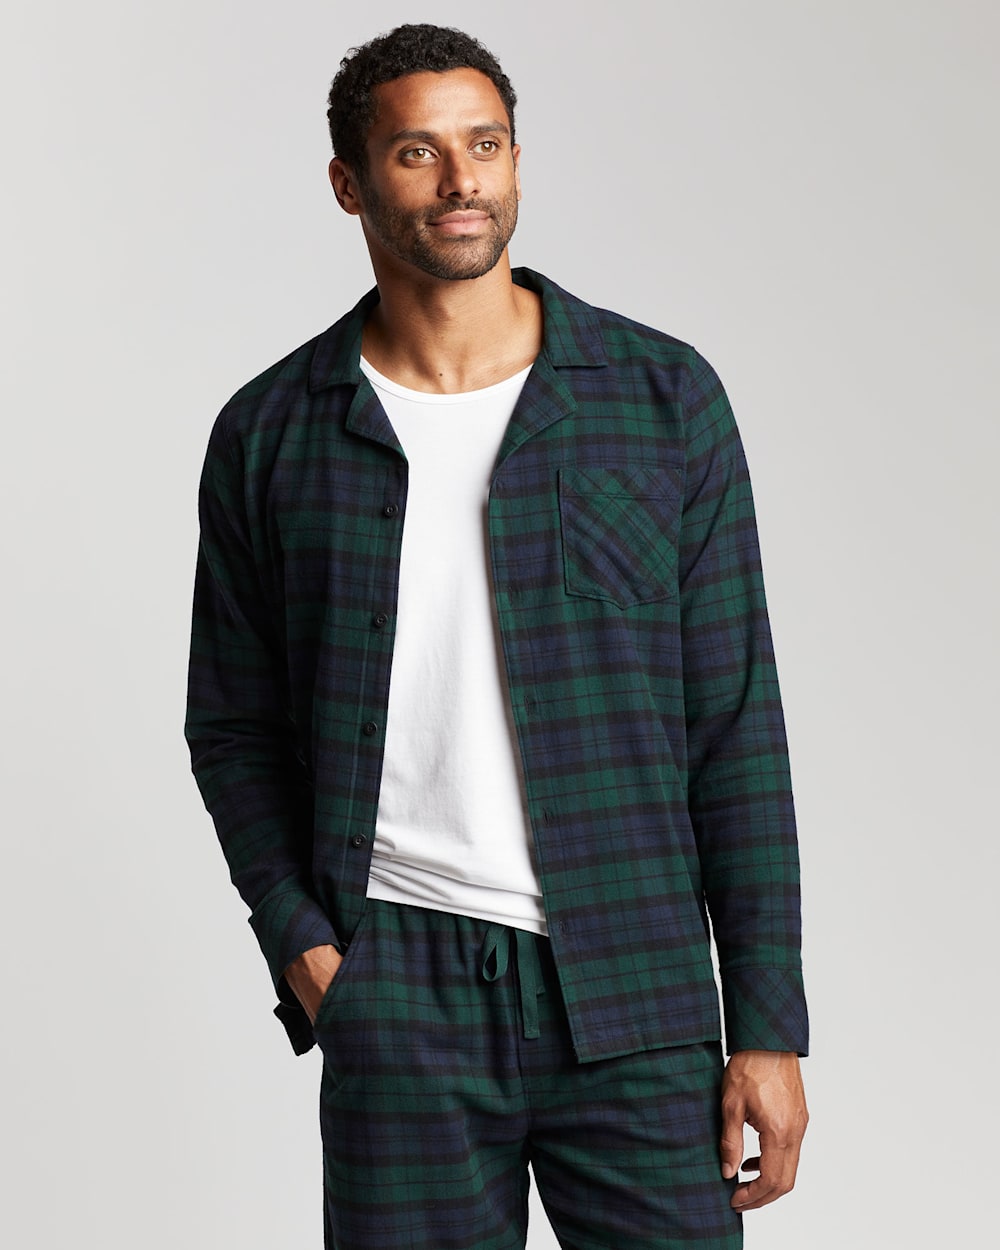 ALTERNATE VIEW OF MEN'S FLANNEL PAJAMA SET IN GREEN/BLUE PLAID image number 1